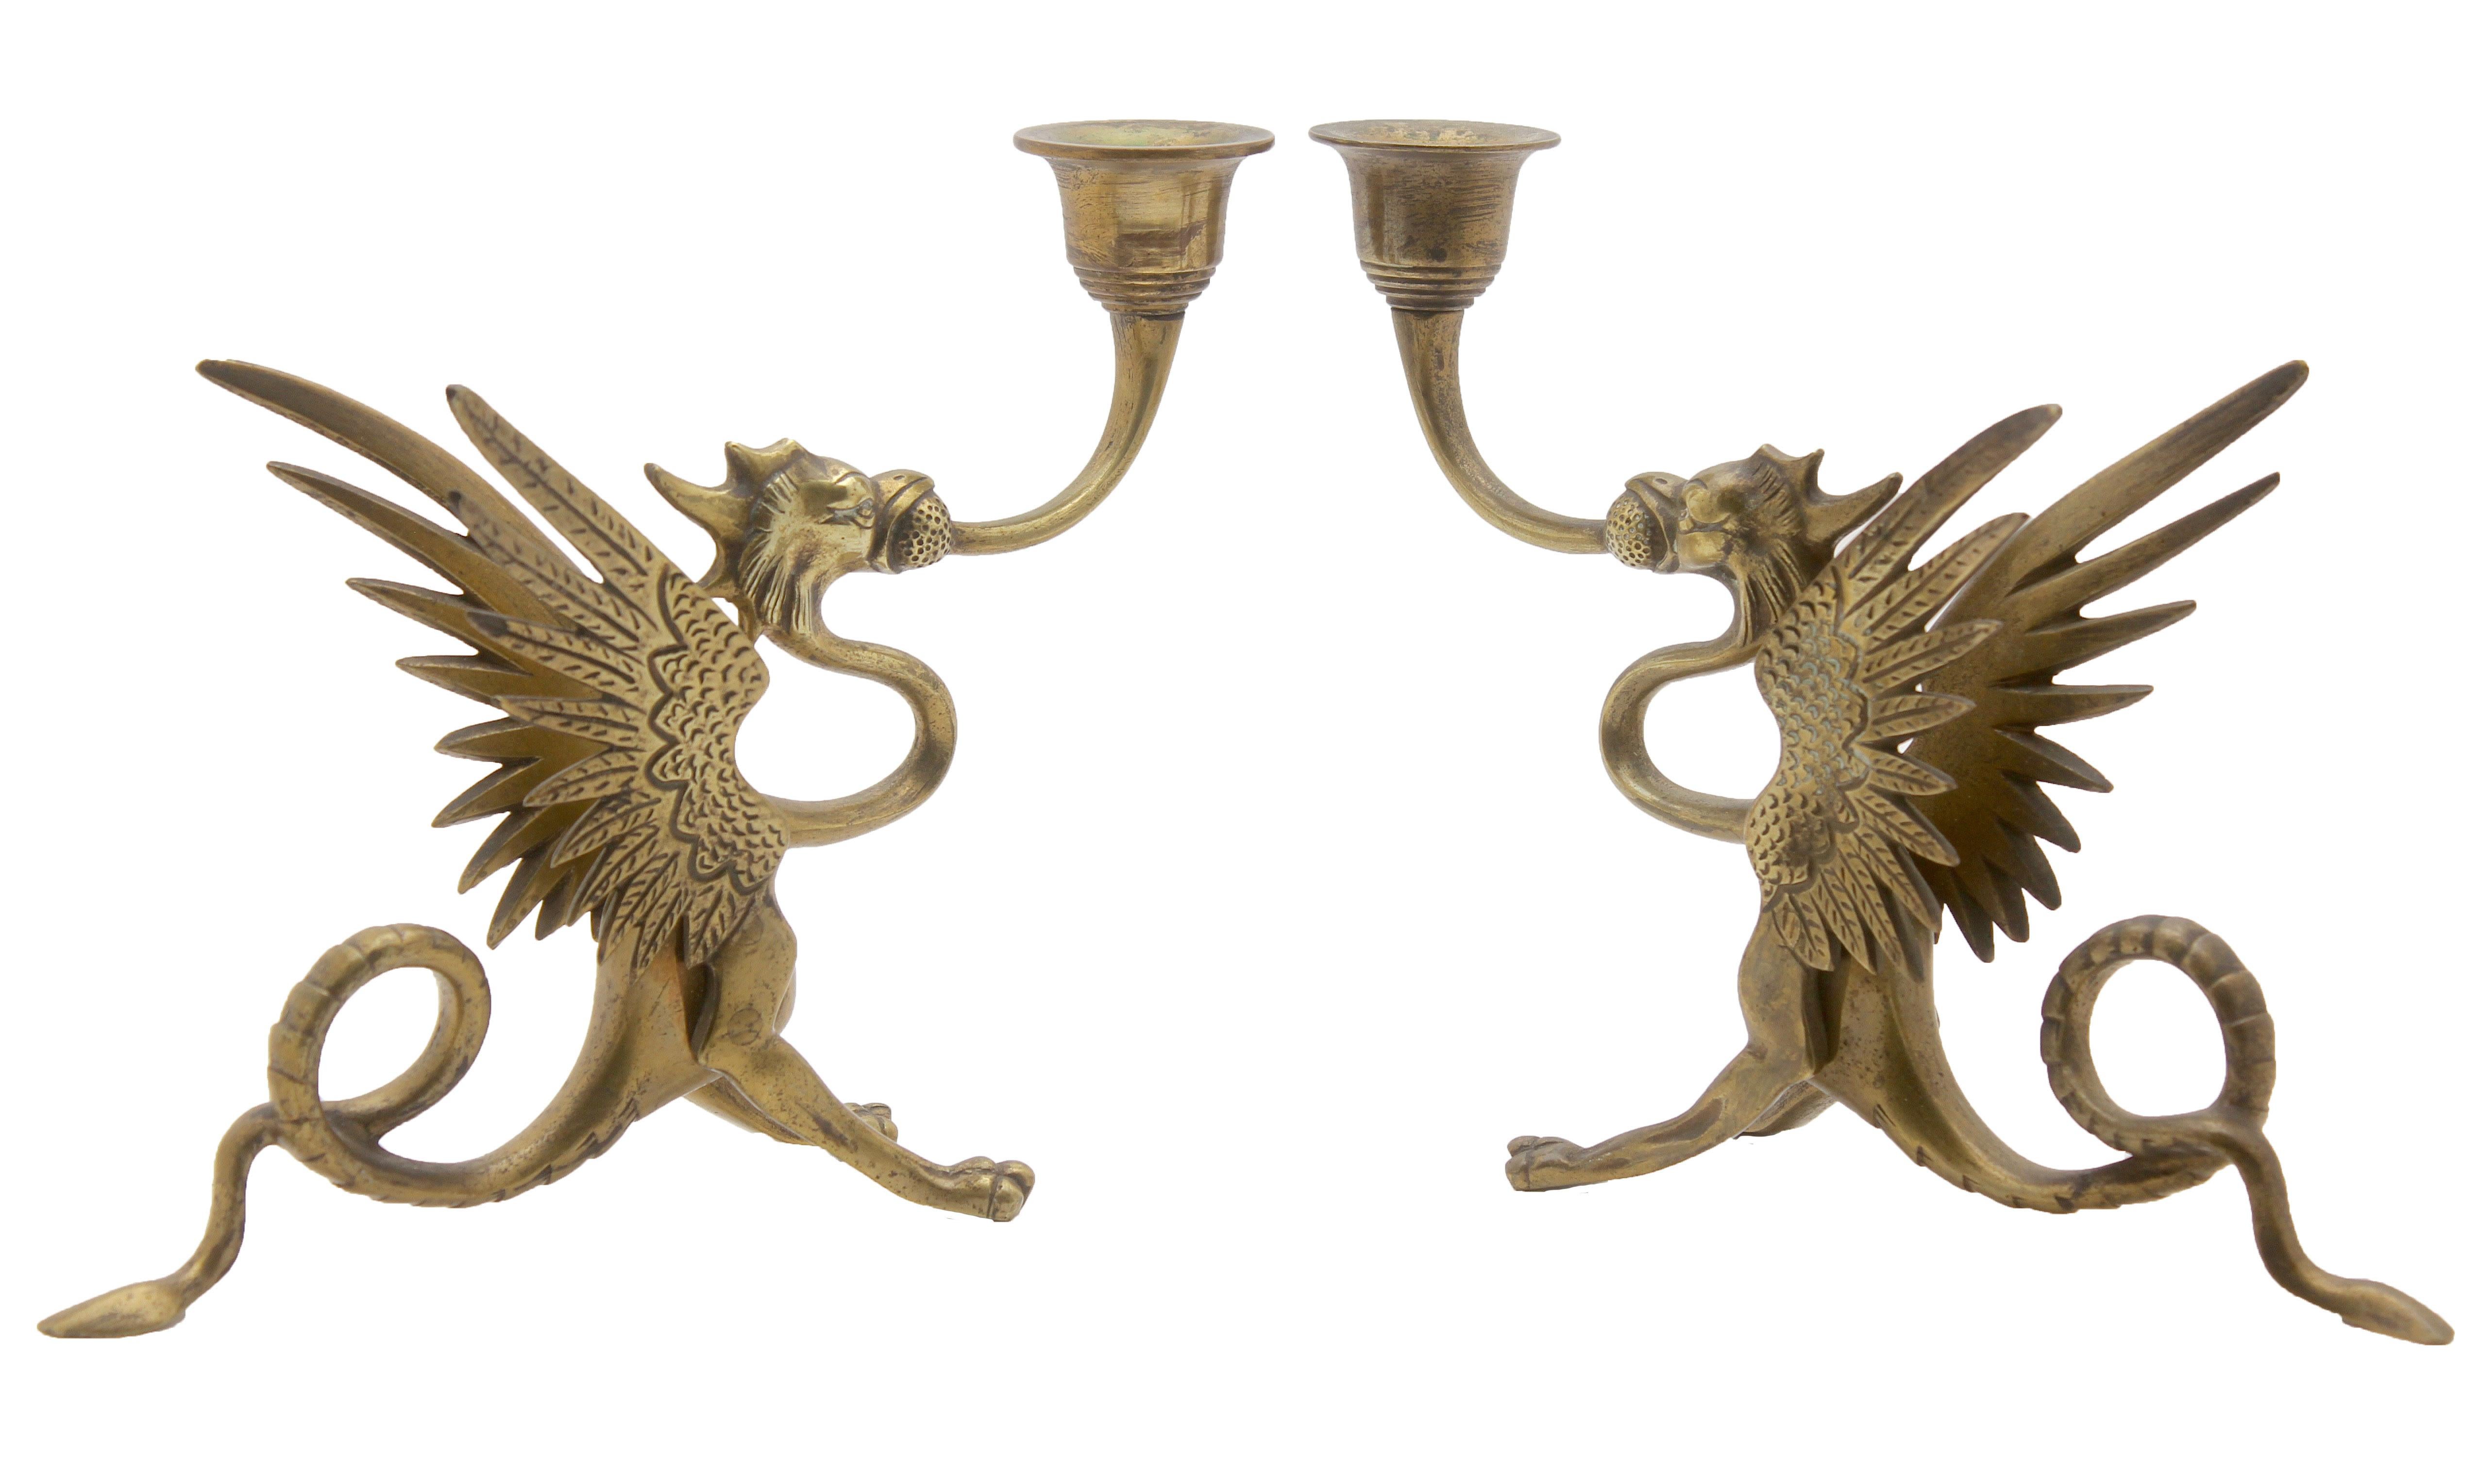 Two brass counterbalanced candlesticks in the shape of dragons.

This type of candlestick is designed to hold the candle over the edge of
a shelf, mantelpiece, or piano. The popular design is found in a range
of similar designs which have